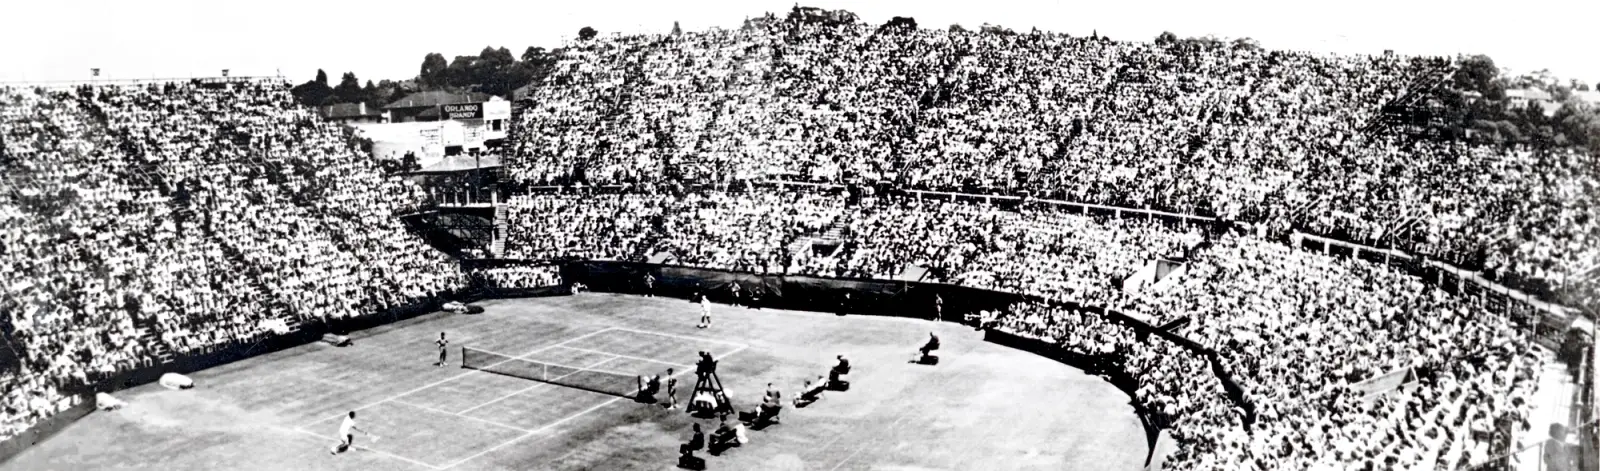 Aerial view of crowded stands at Kooyong Stadium in 1953. 